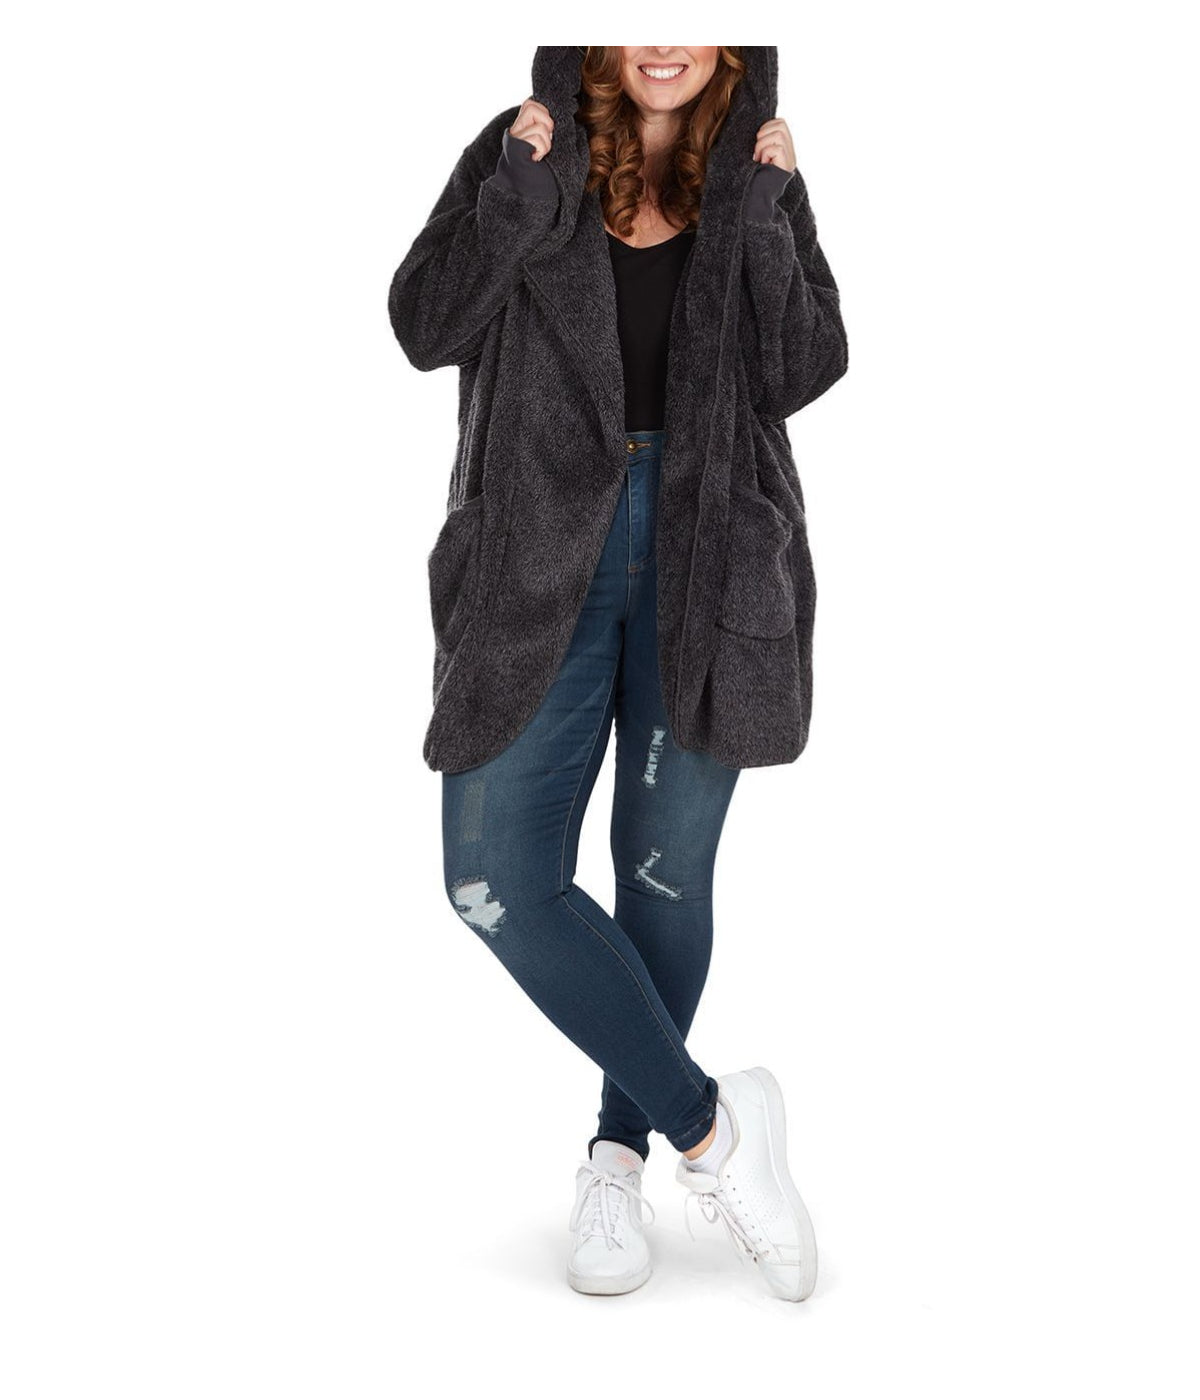 Women's Marled Plush Hooded Lounge Sweater with Shawl Collar Charcoal